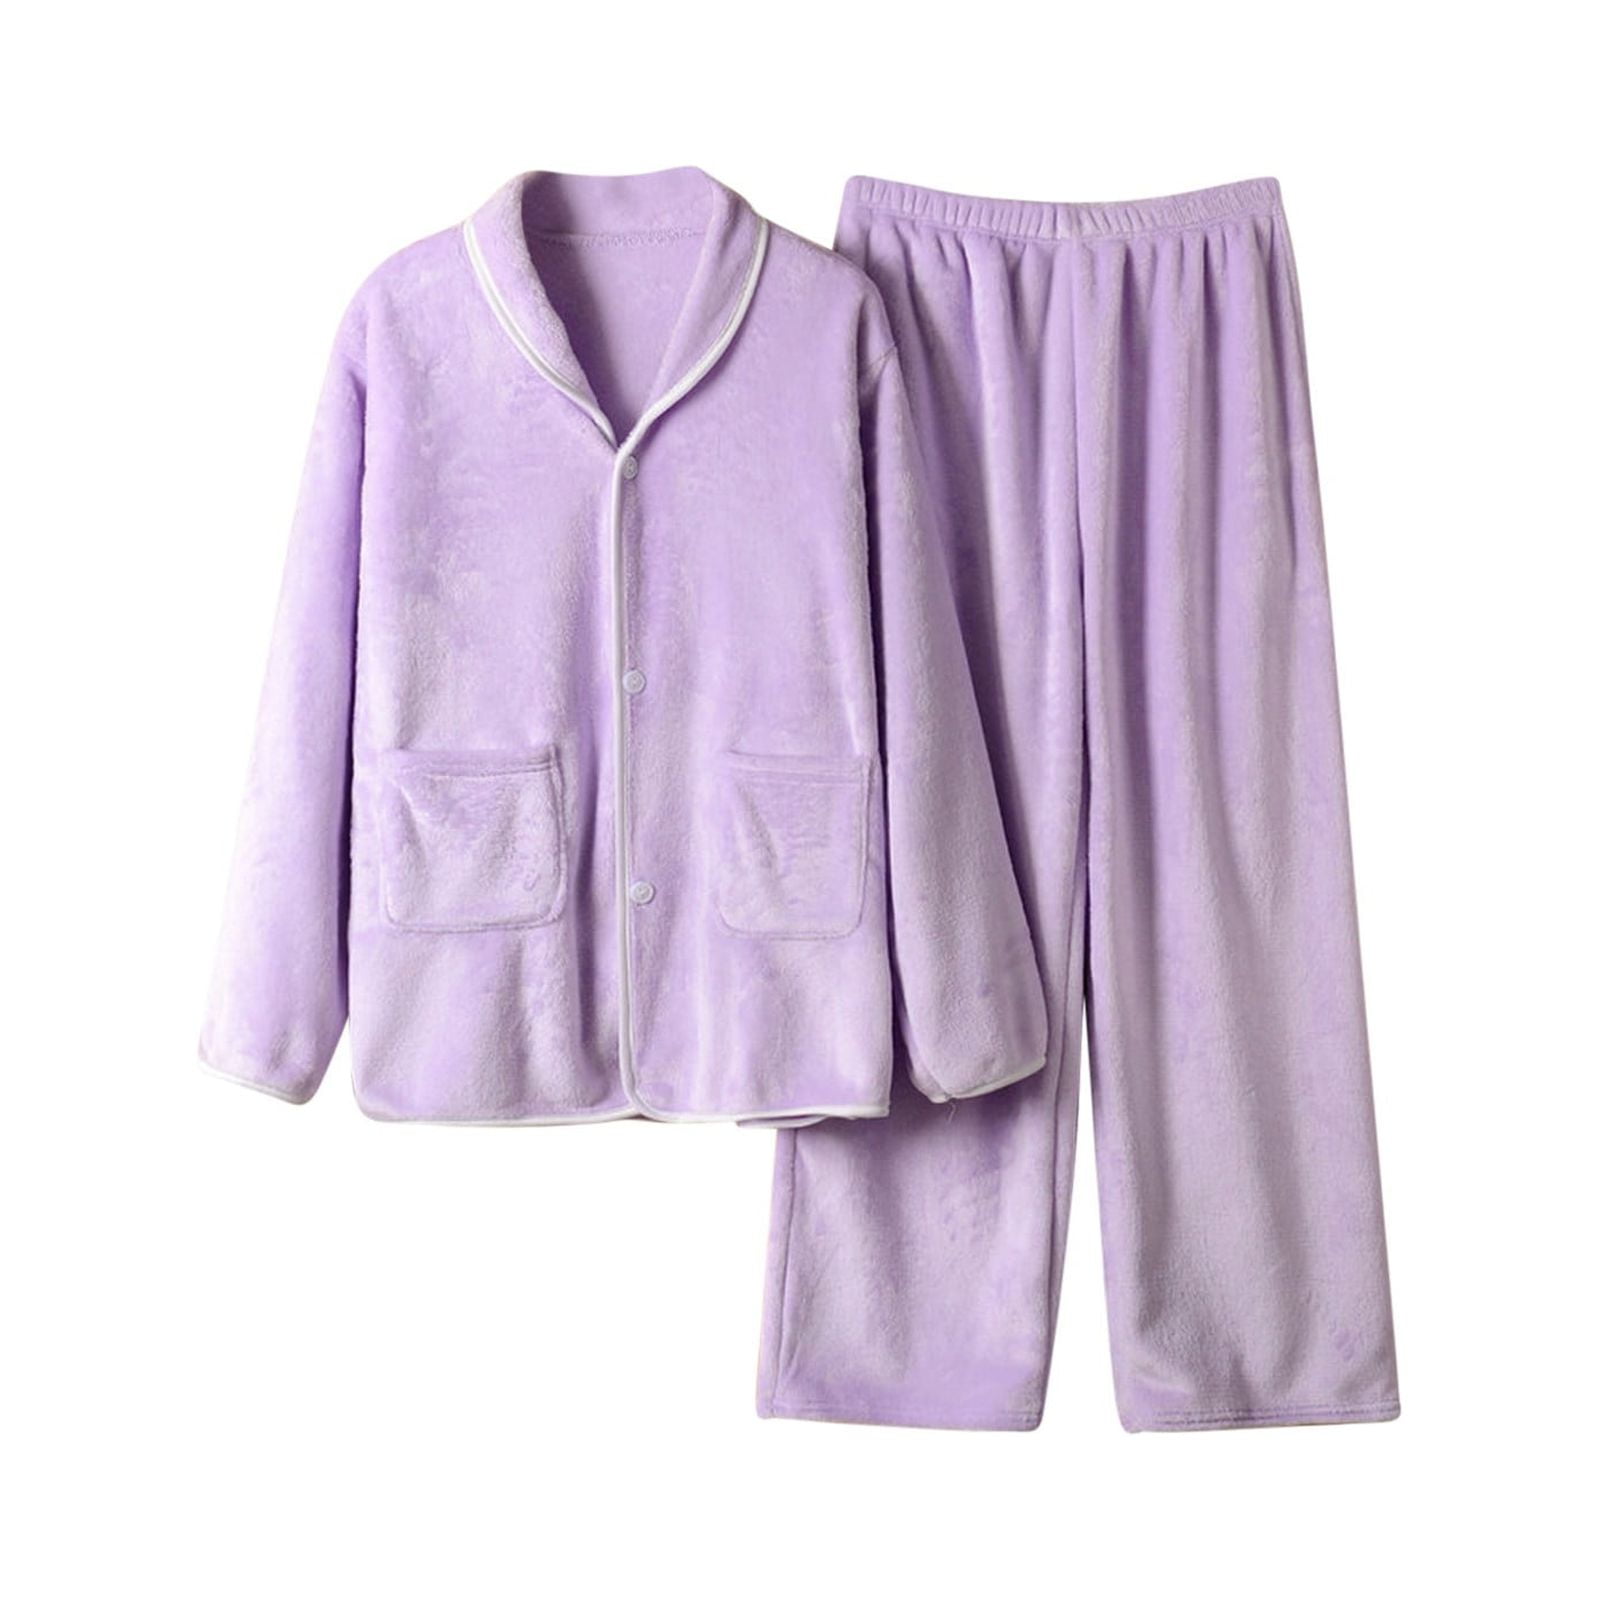 Diufon Womens Thermal Flannel Pajama Sets Button Down Shirts And Pants ...